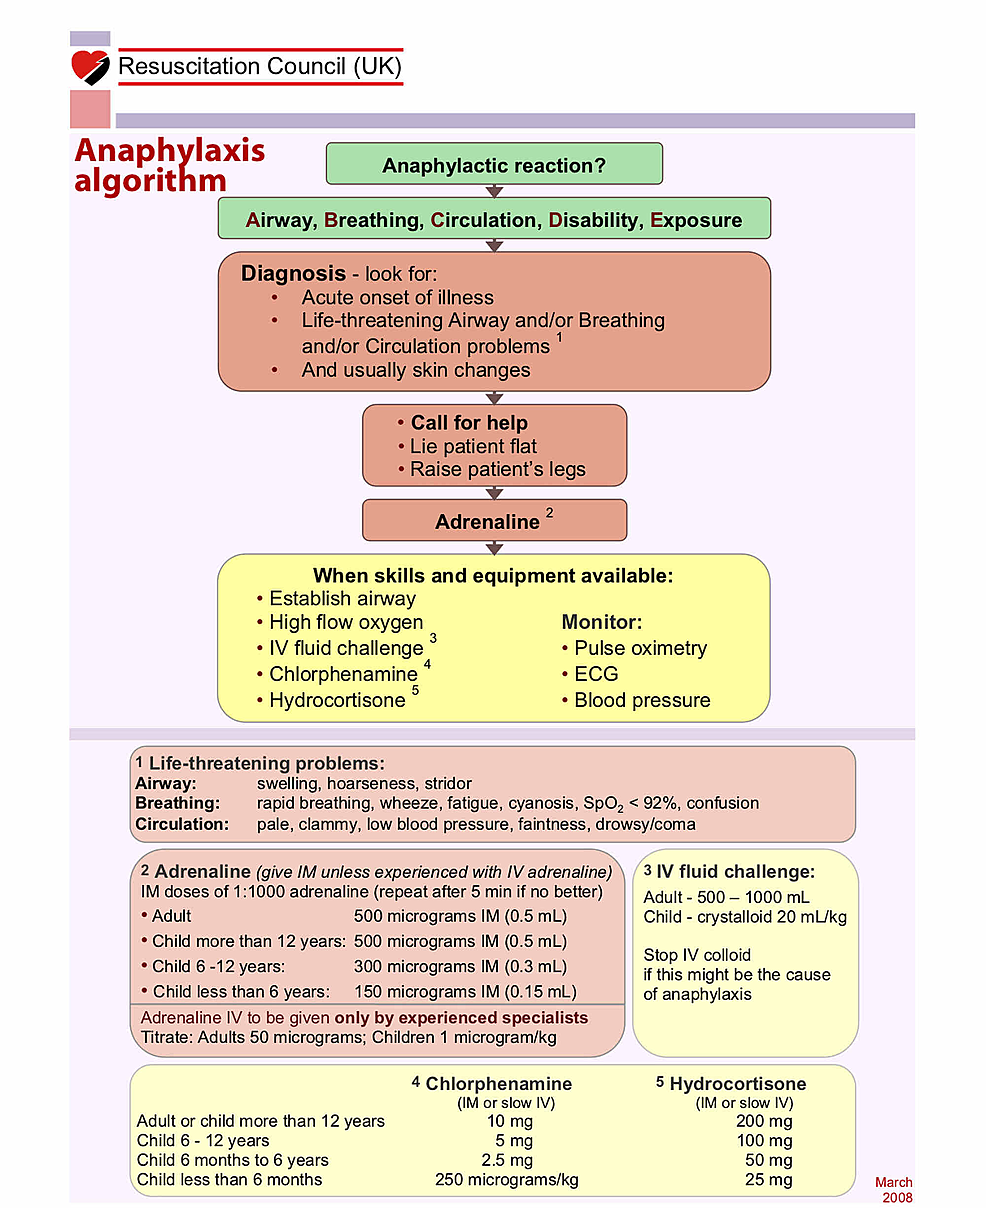 The-Resuscitation-Council-(UK)-algorithm-for-managing-anaphylaxis.-Weighting-for-the-marking-scheme-was-based-upon-the-order-in-which-interventions-are-prioritised-in-this-algorithm.